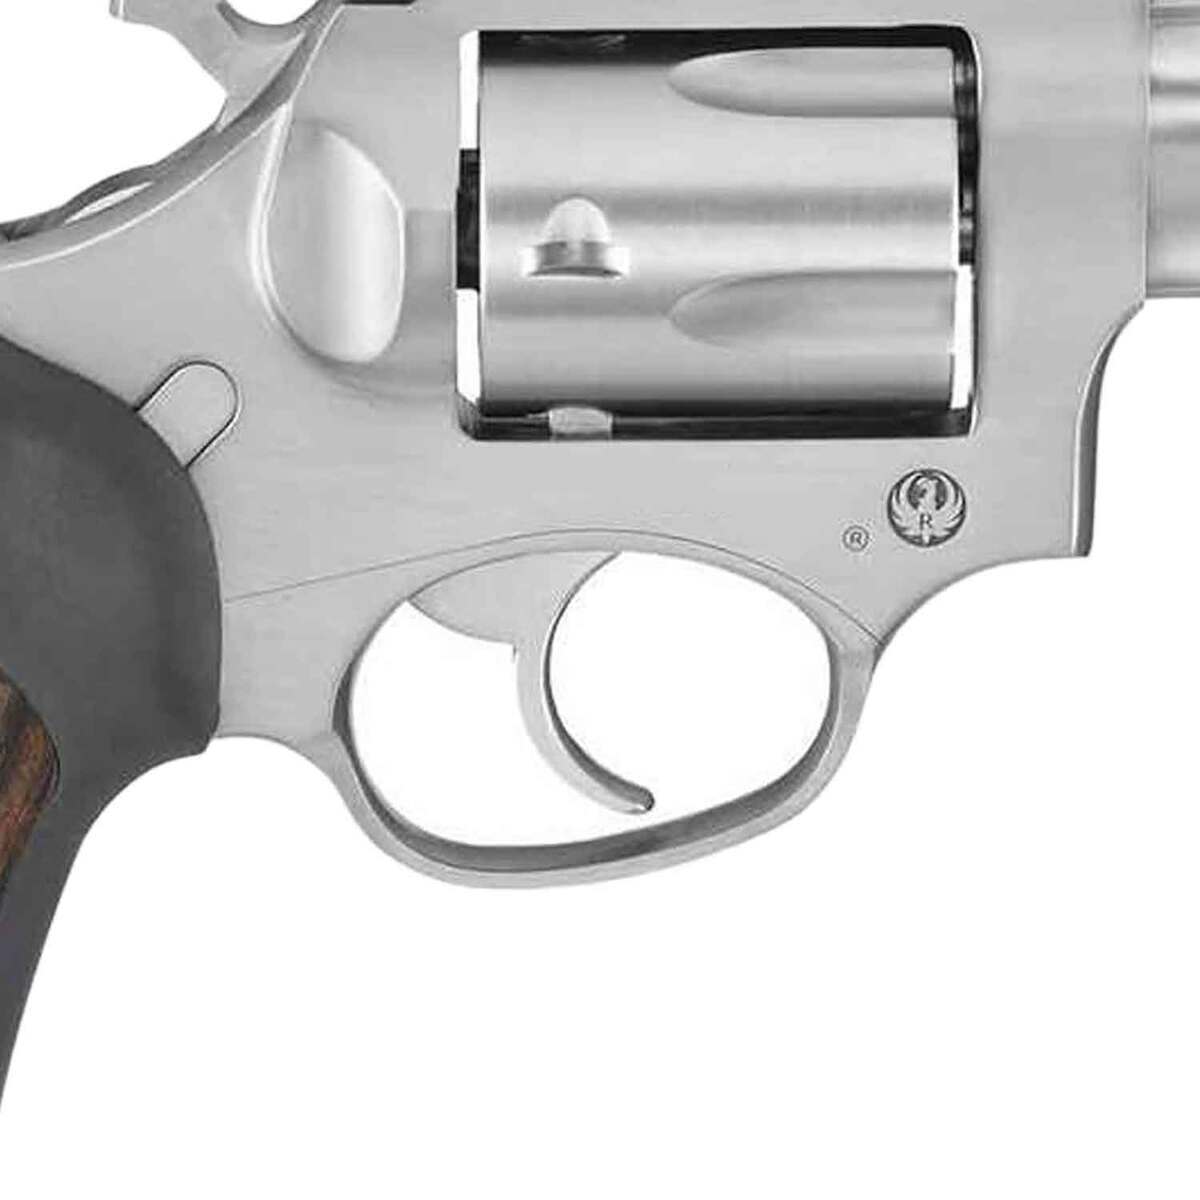 Ruger Sp101 357 Magnum 42in Stainless Revolver 5 Rounds Sportsmans Warehouse 6656